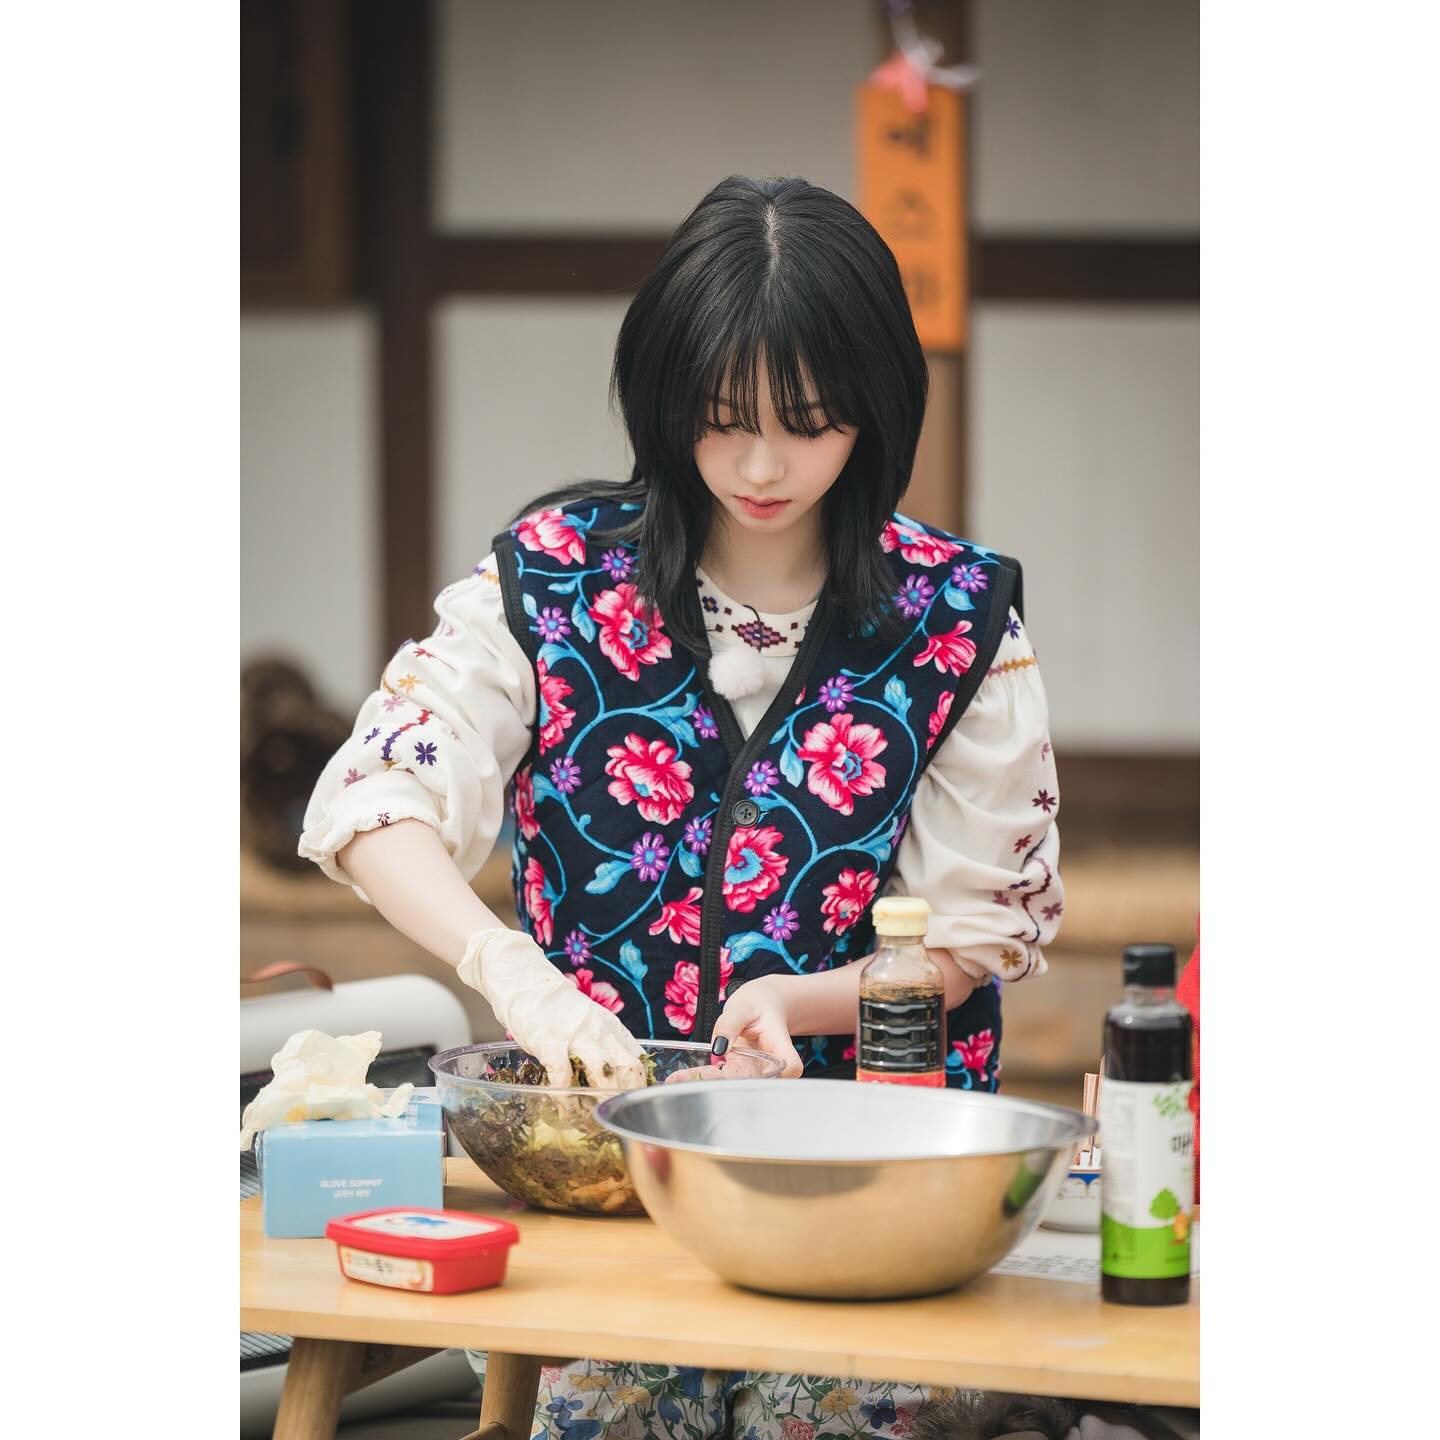 Looking at Karina's posture, it looks like she's doing some cooking.